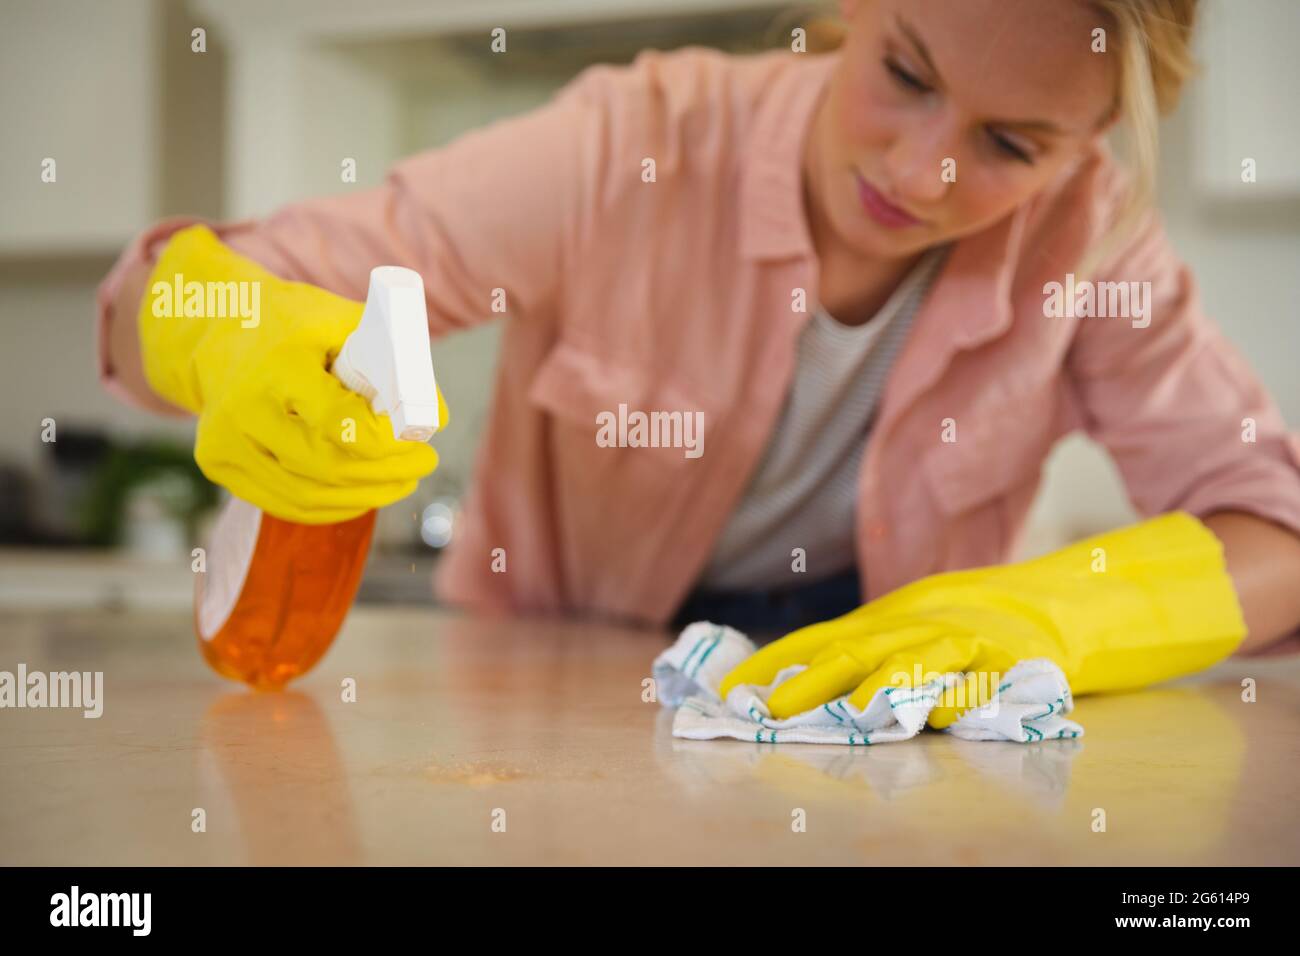 Caucasian woman wearing rubber gloves cleaning kitchen worktop with cloth and spray Stock Photo